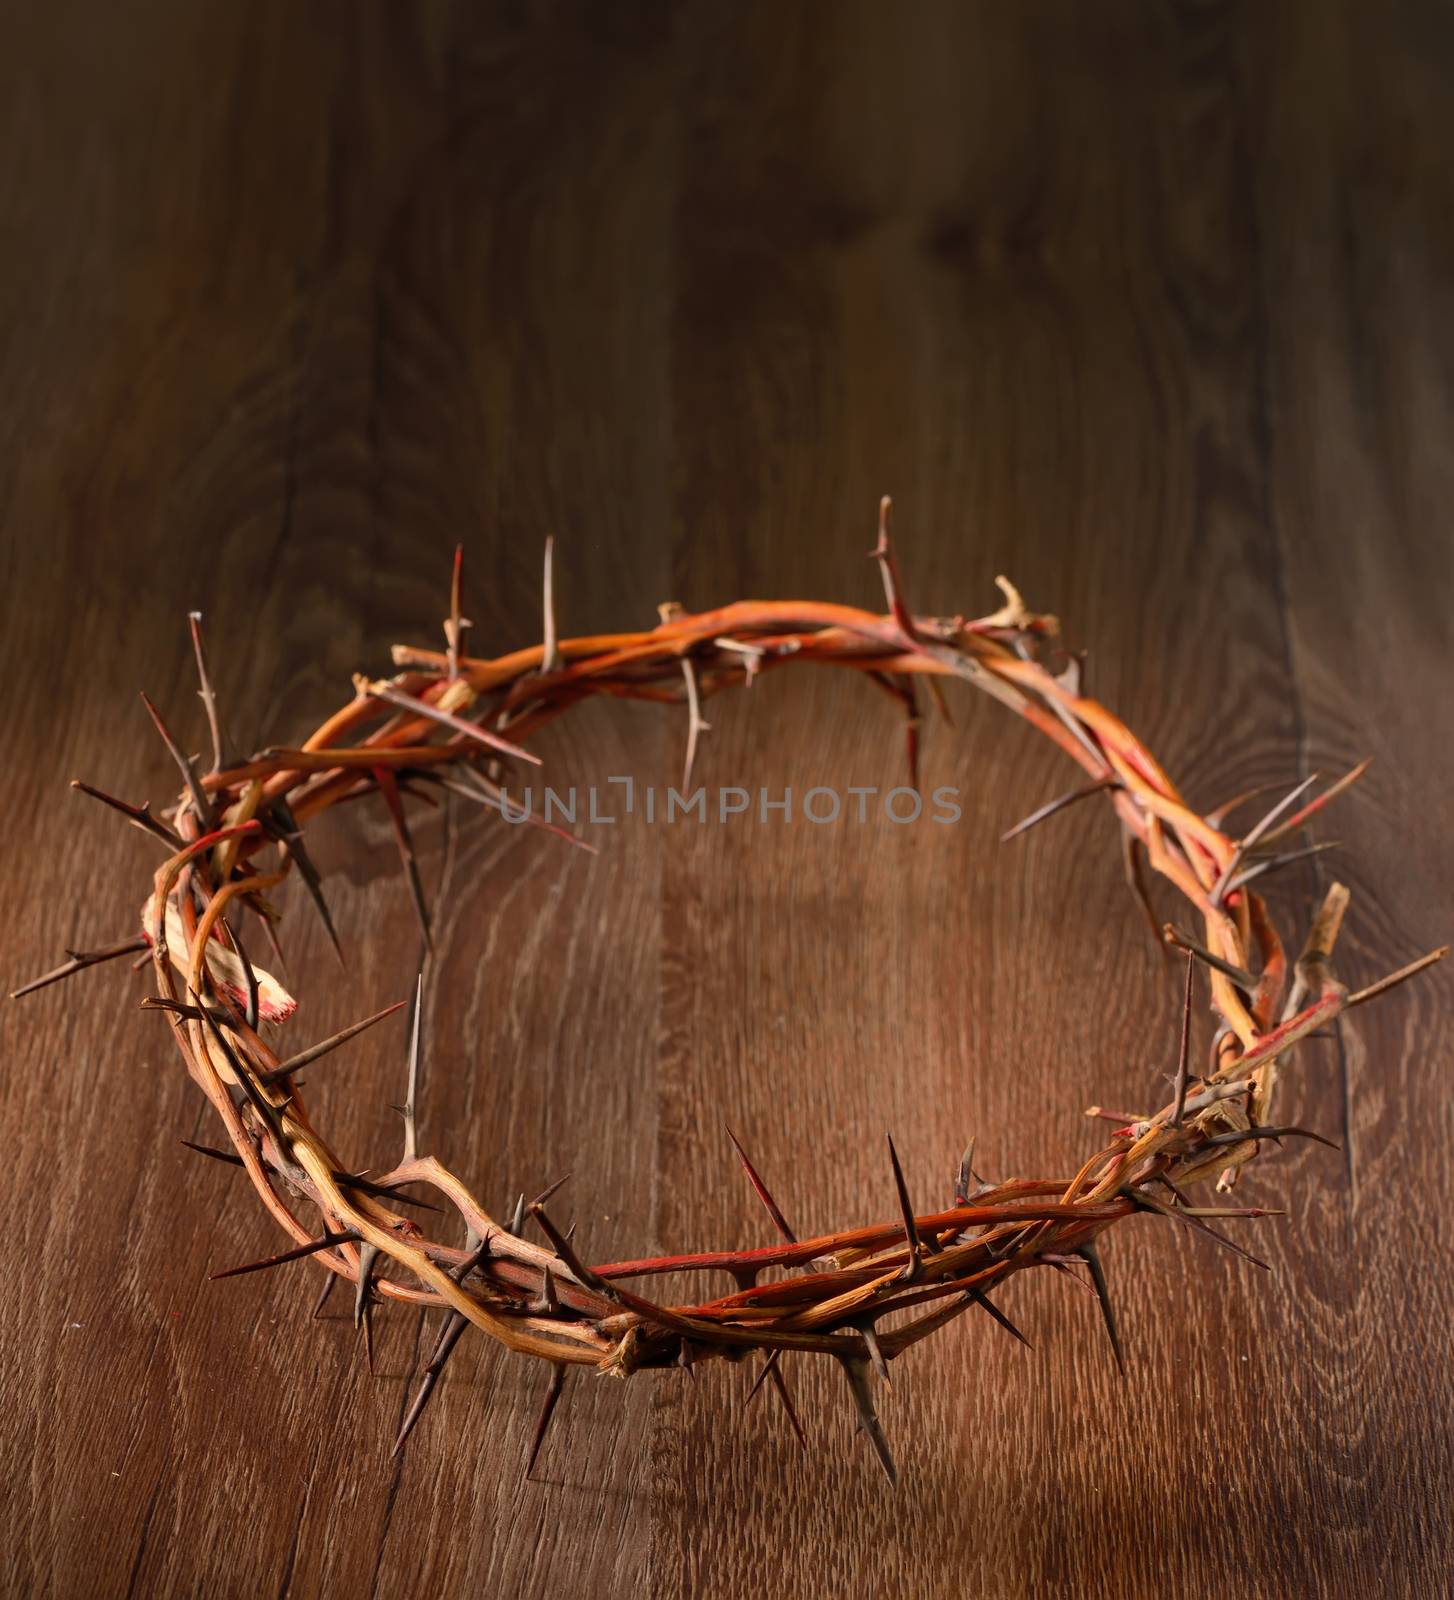 Crown of thorns on wooden background